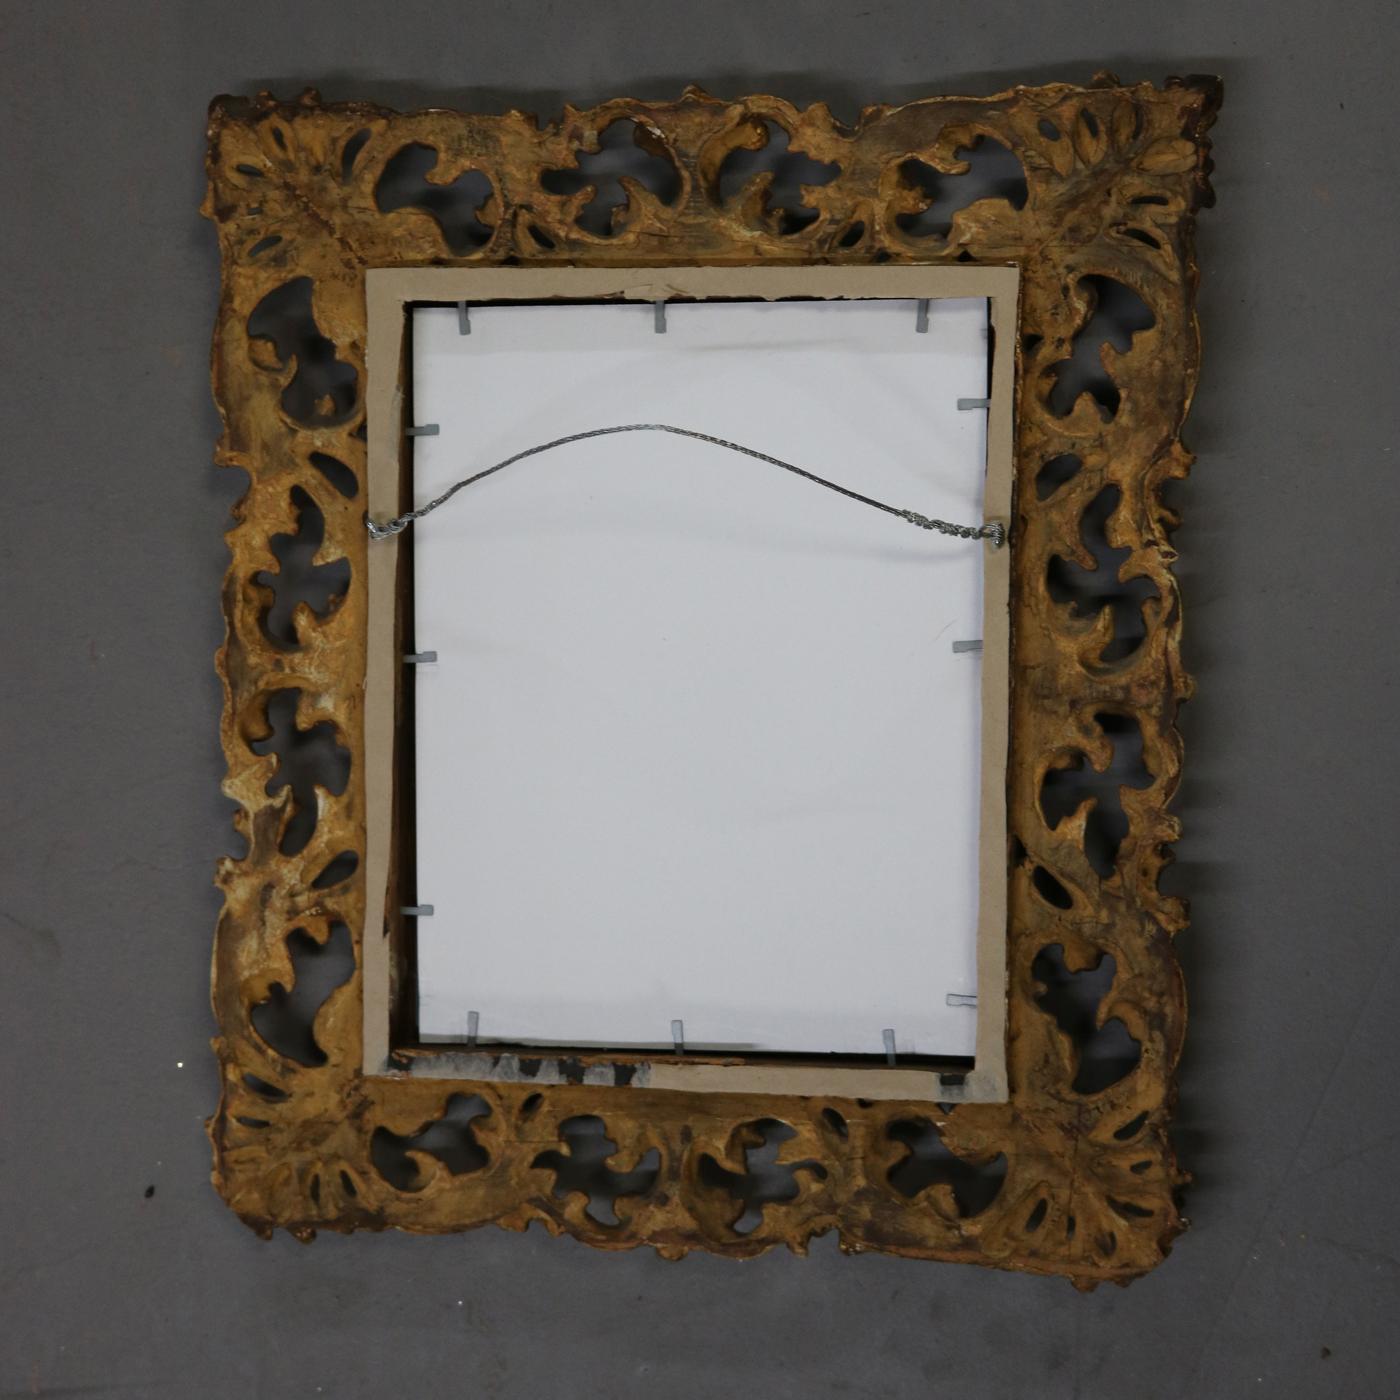 Carved Italian Rococo Style Reticulated Foliate Giltwood Wall Mirror, 20th Century